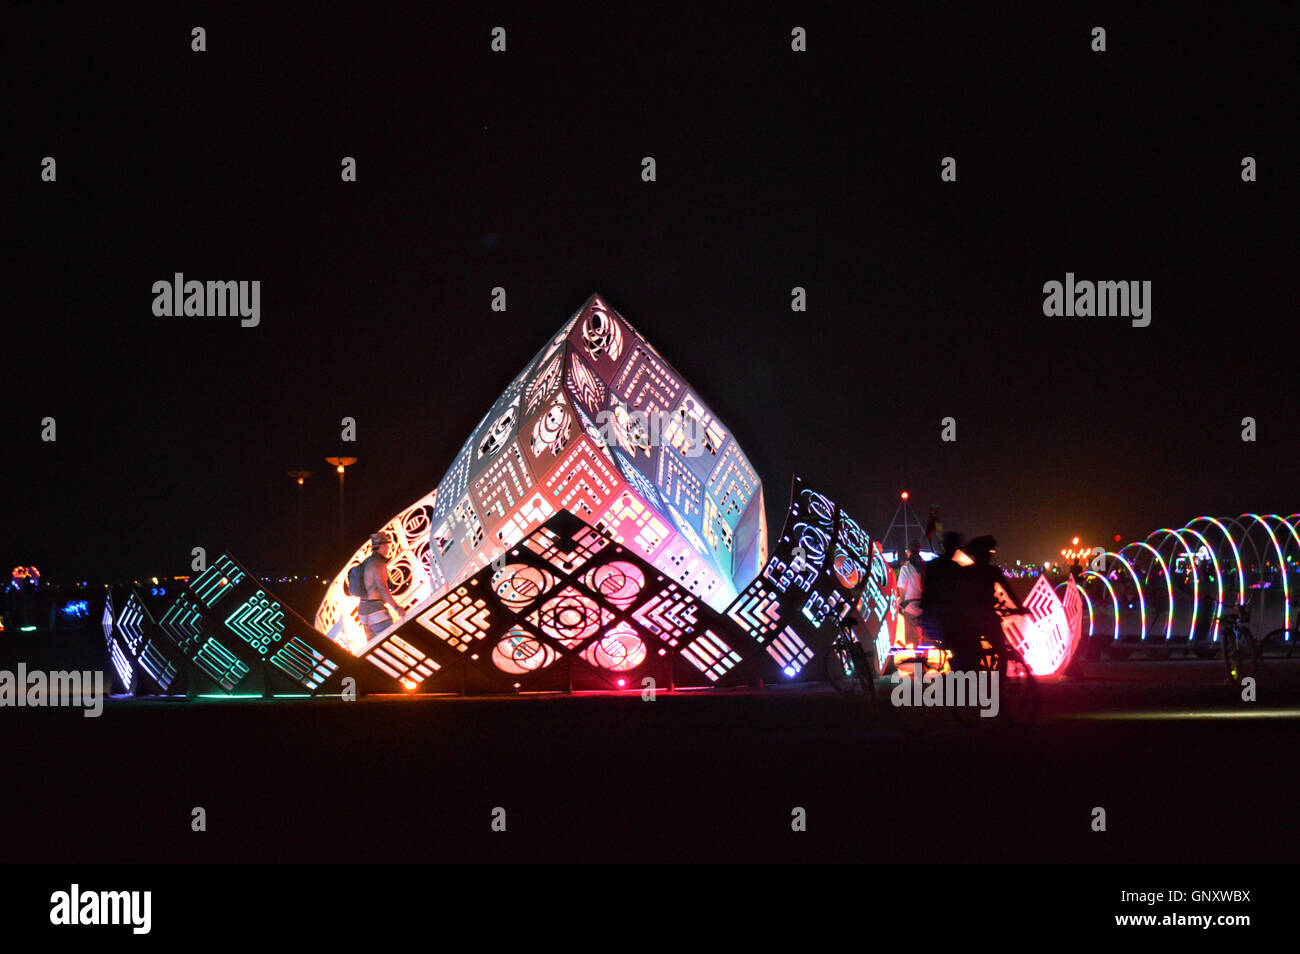 The Sisya art installation at night during the annual desert festival Burning Man August 30, 2016 in Black Rock City, Nevada. The annual festival attracts 70,000 attendees in one of the most remote and inhospitable deserts in America. Stock Photo